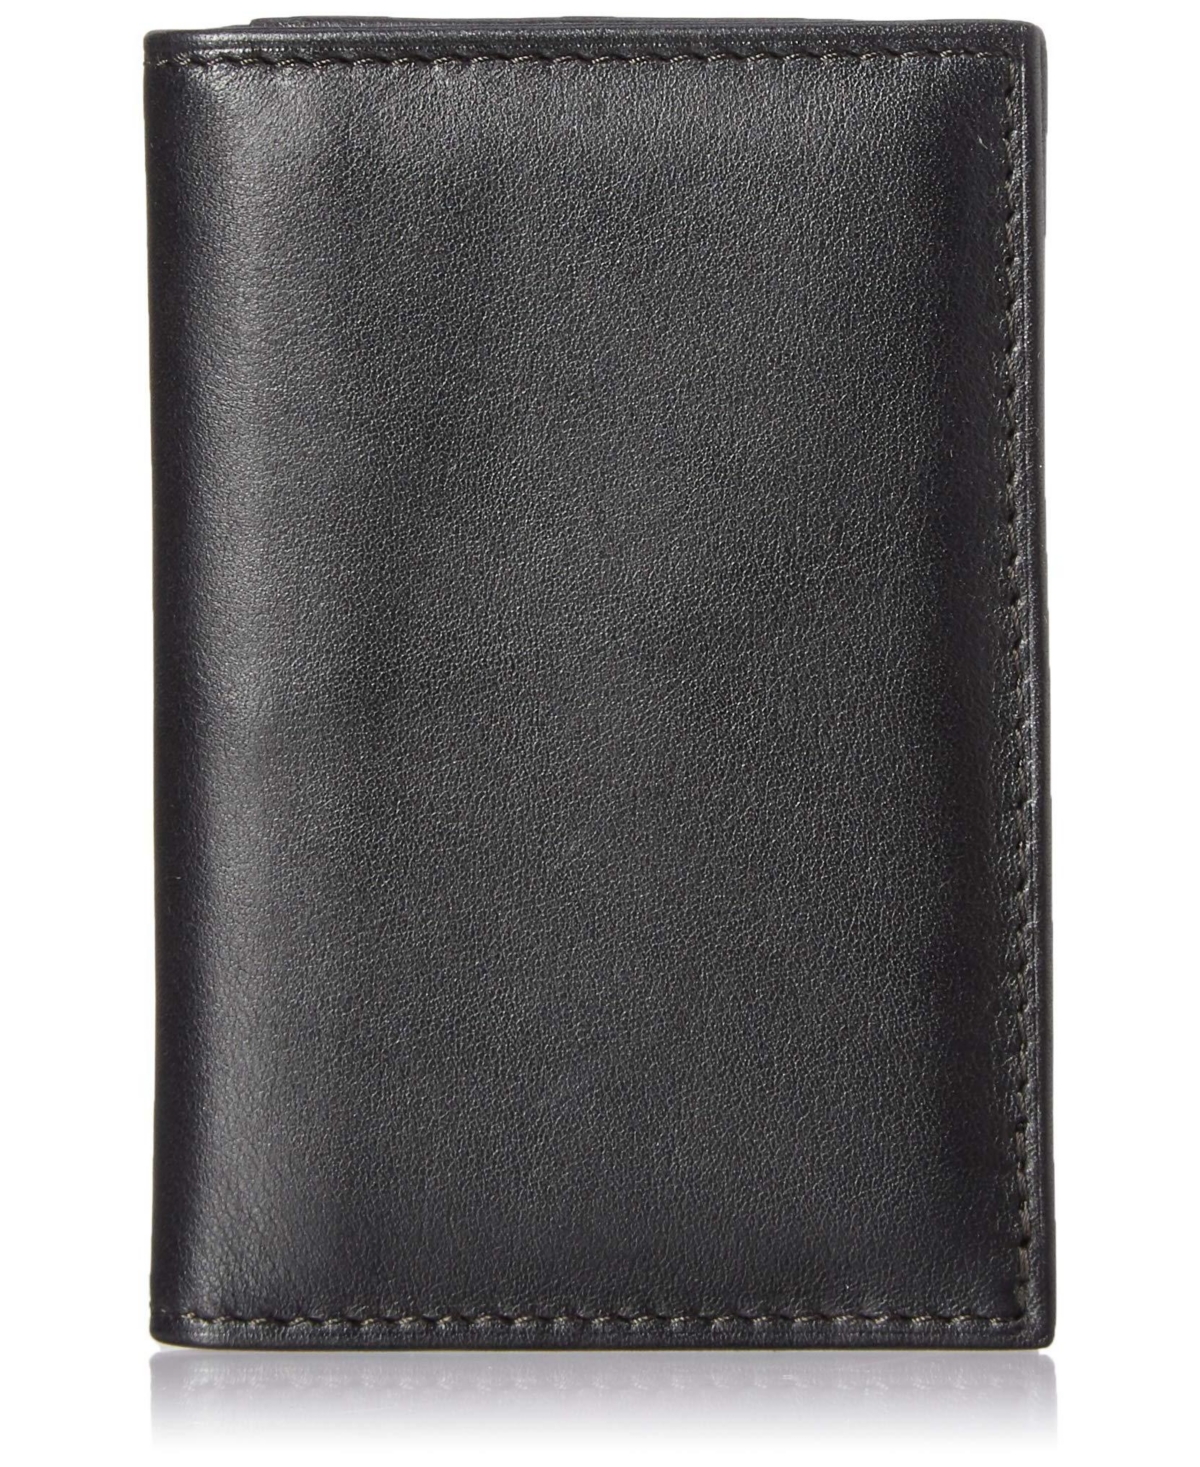 Nappa Vitello Full Gusset 2 Pocket Card Case with Id - Black leather